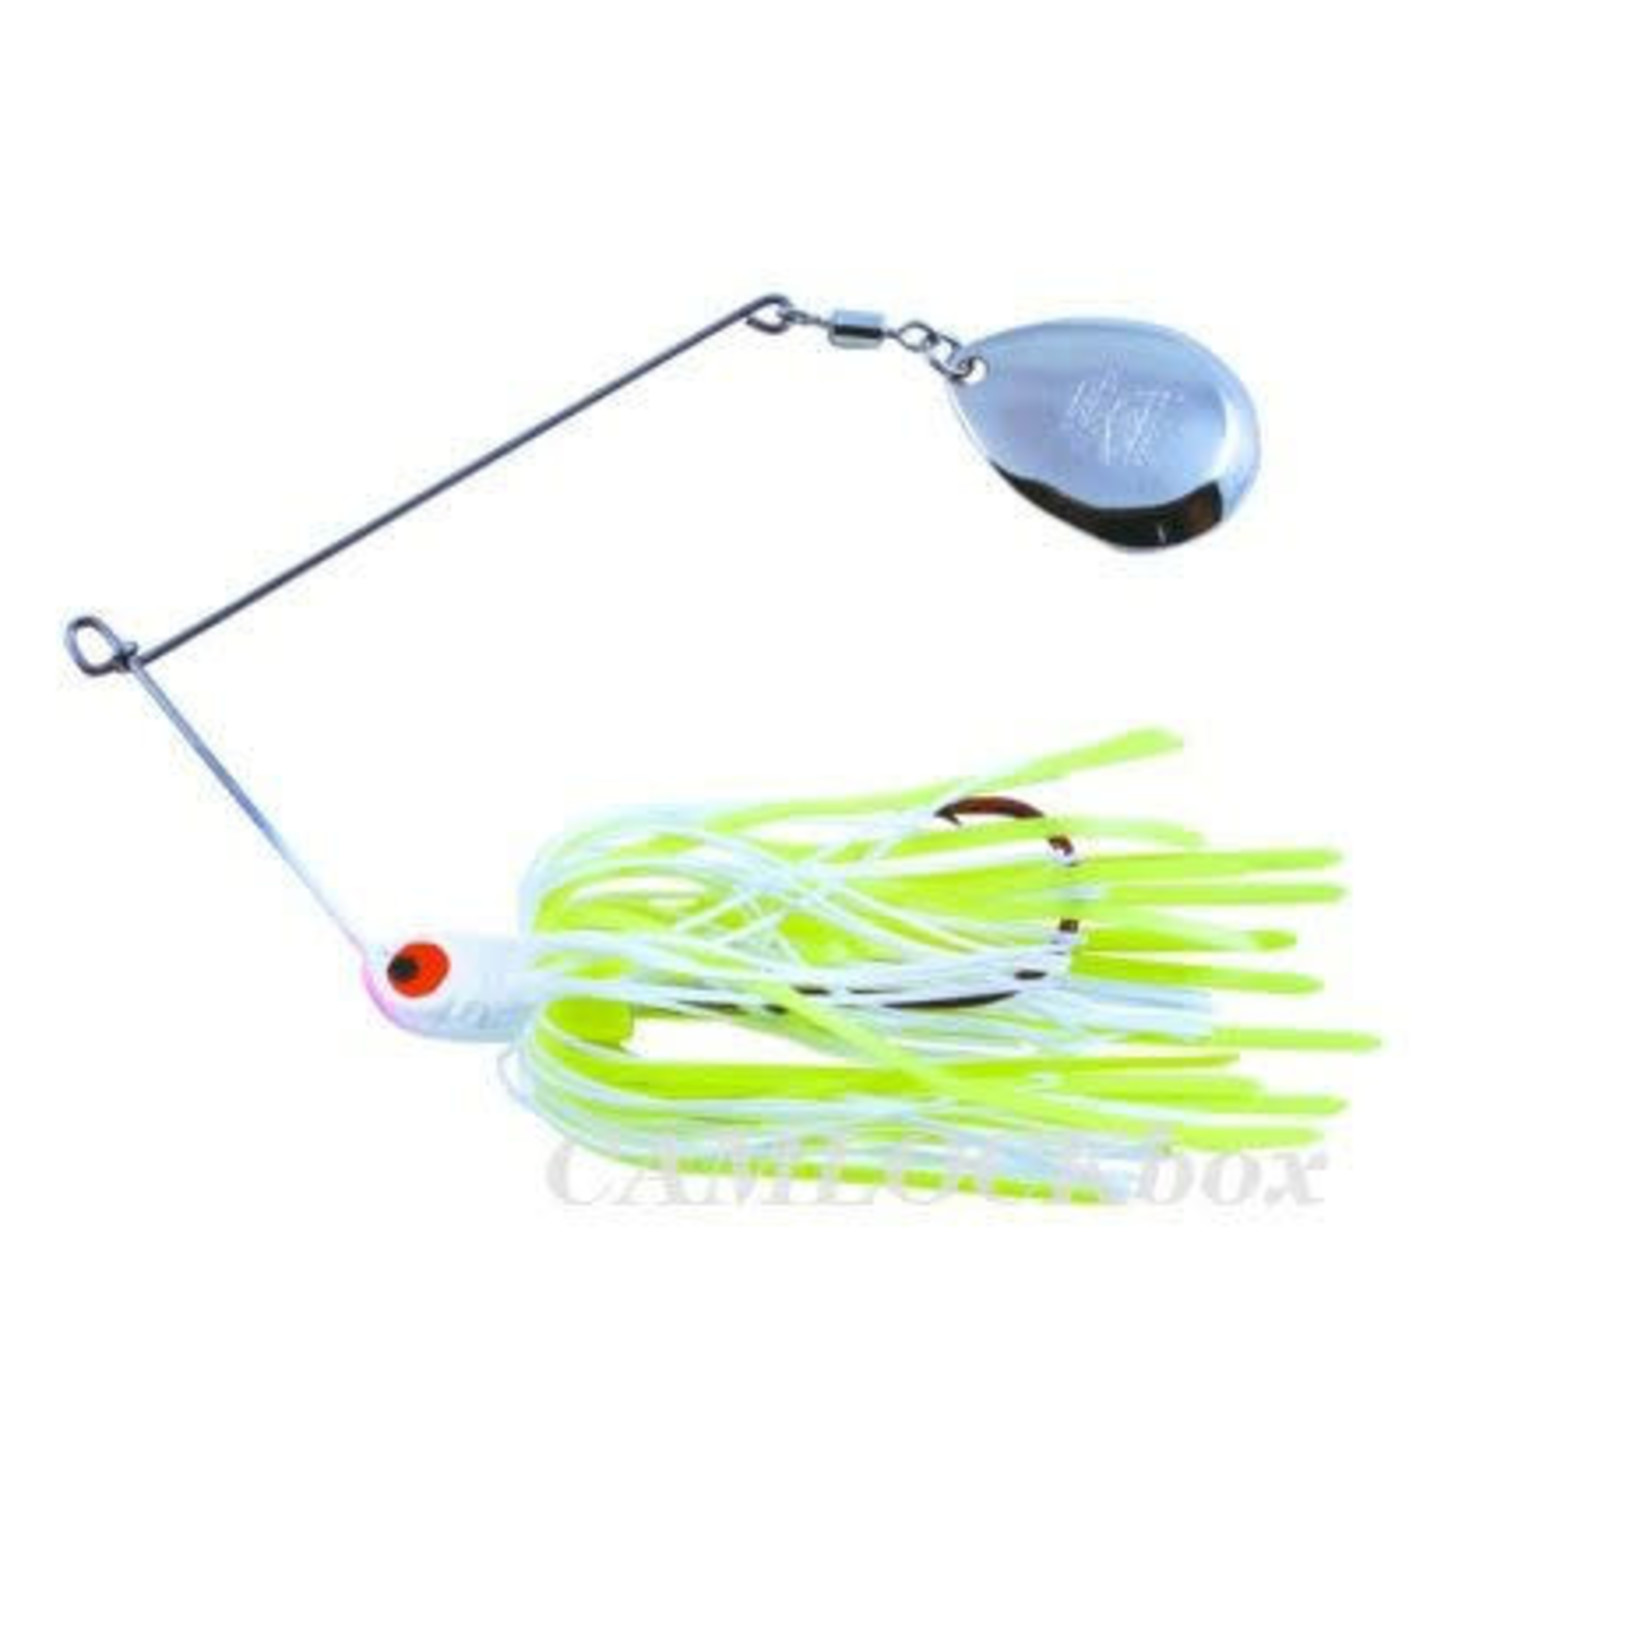 Northland Canary Tandem Reed-Runner Spinnerbait